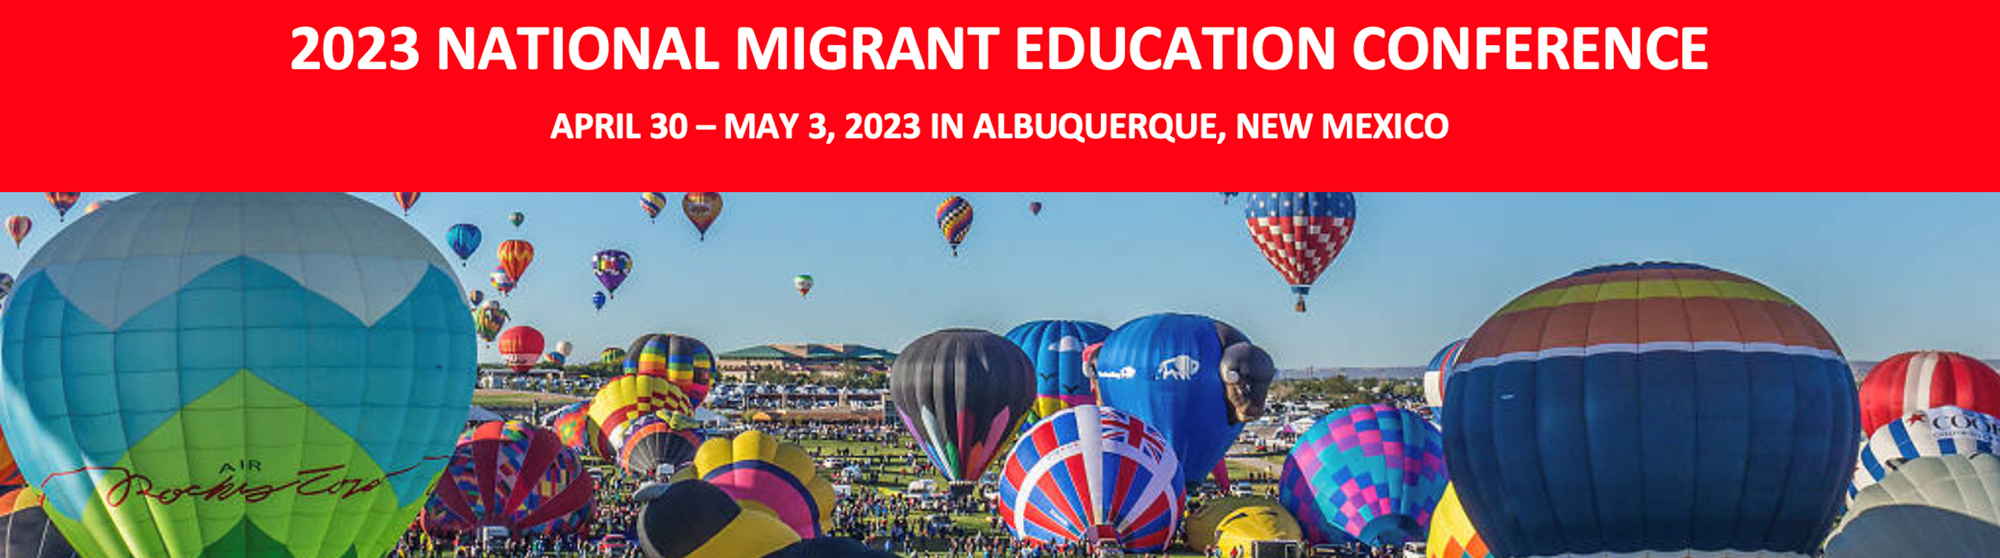 2023 National Migrant Education Conference April 30 - May 3 in Albuquerque, NM